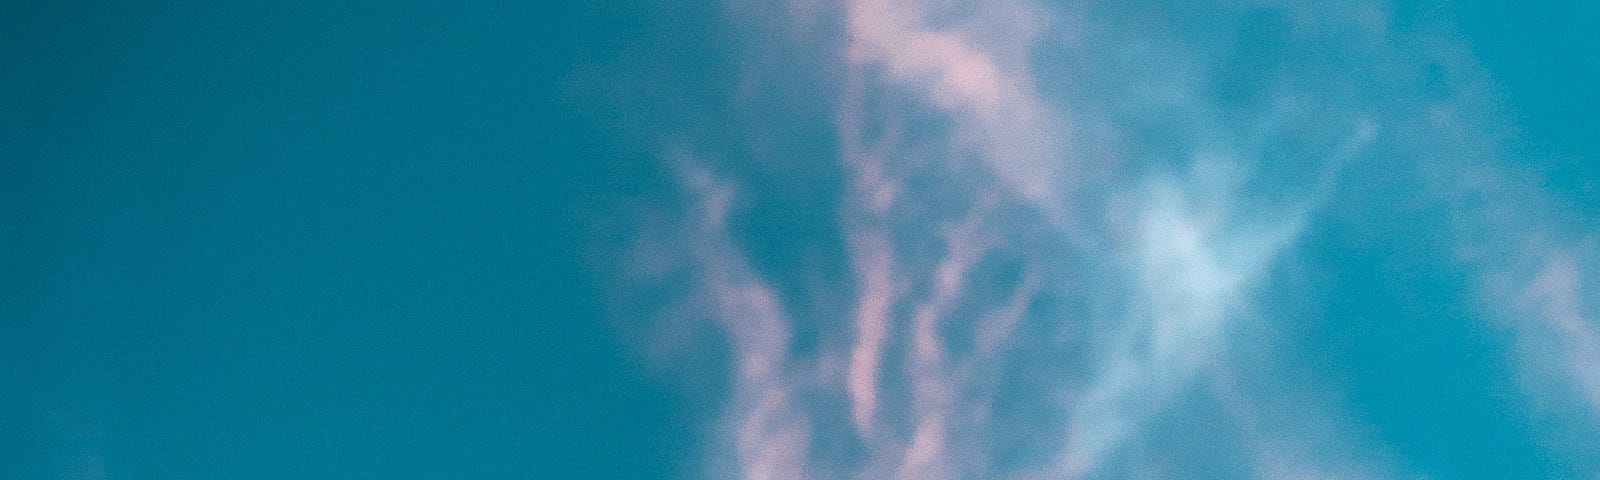 A lower arm and hand reaches up to a blue sky (with a few clouds). Menopausal hot flashes are a problem for many of my patients, including women going through menopause or men receiving some prostate cancer treatments.